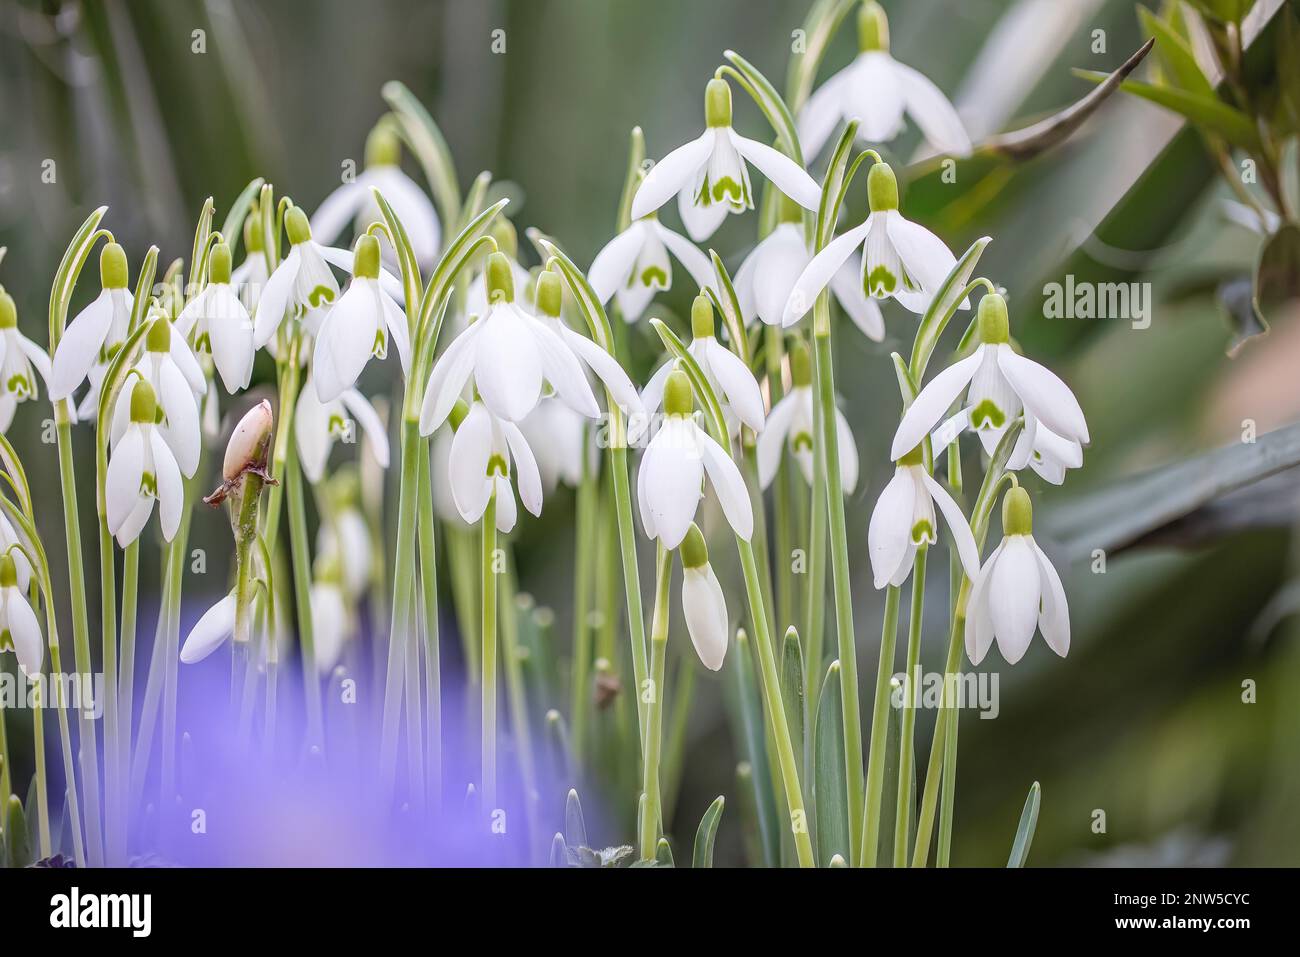 A group of snowdrops (Galanthus) in full bloom with a blue blurry foreground Stock Photo